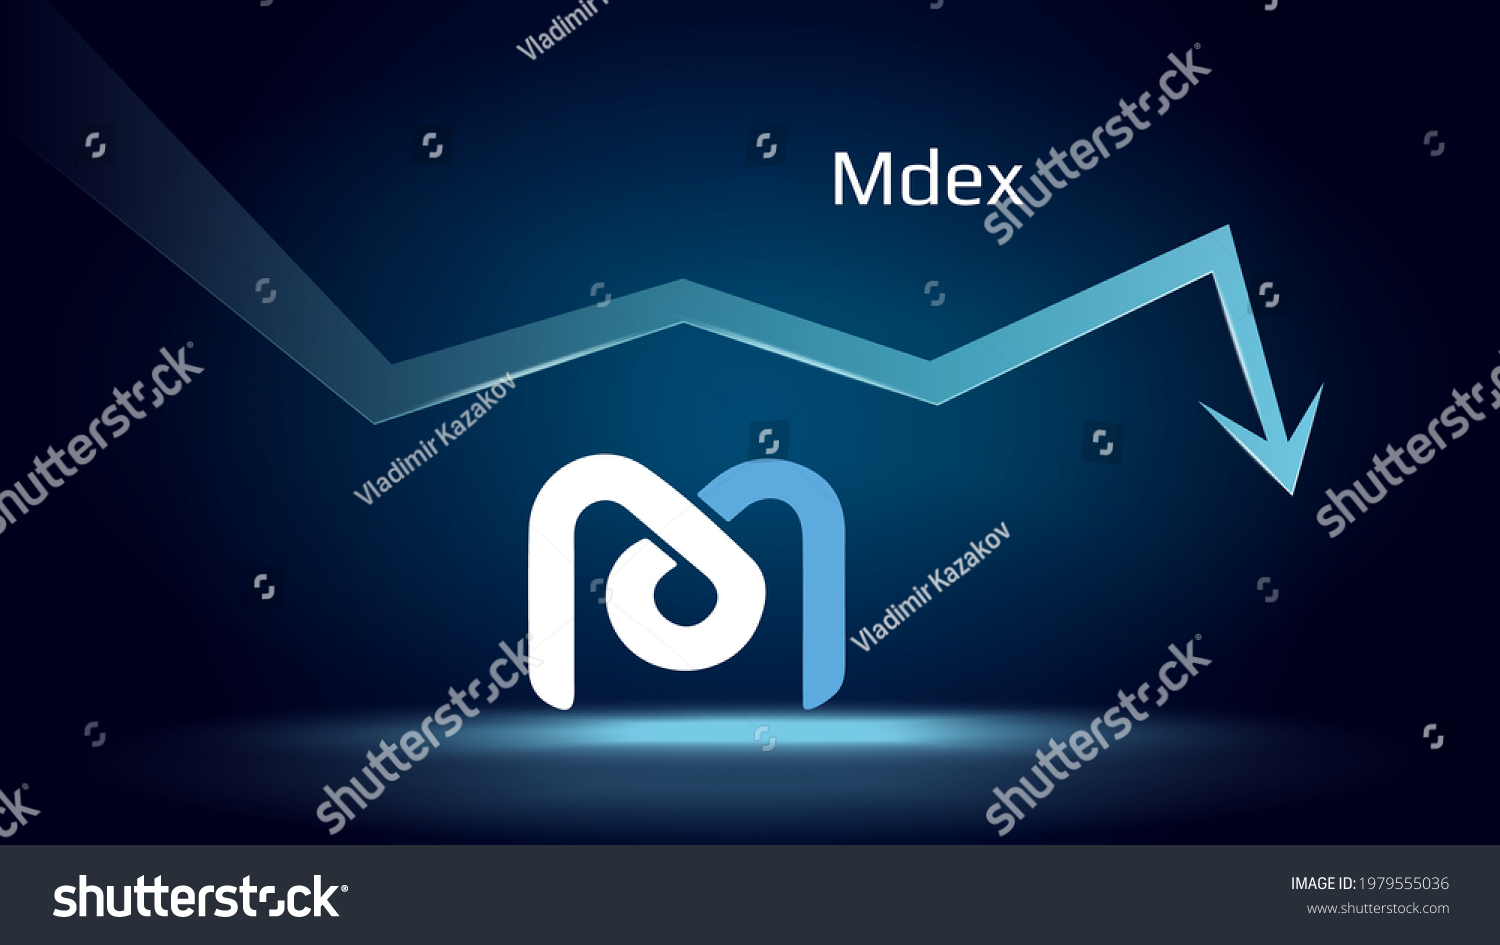 SVG of Mdex MDX in downtrend and price falls down. Cryptocurrency coin symbol and down arrow. Uniswap crushed and fell down. Cryptocurrency trading crisis and crash. Vector illustration. svg